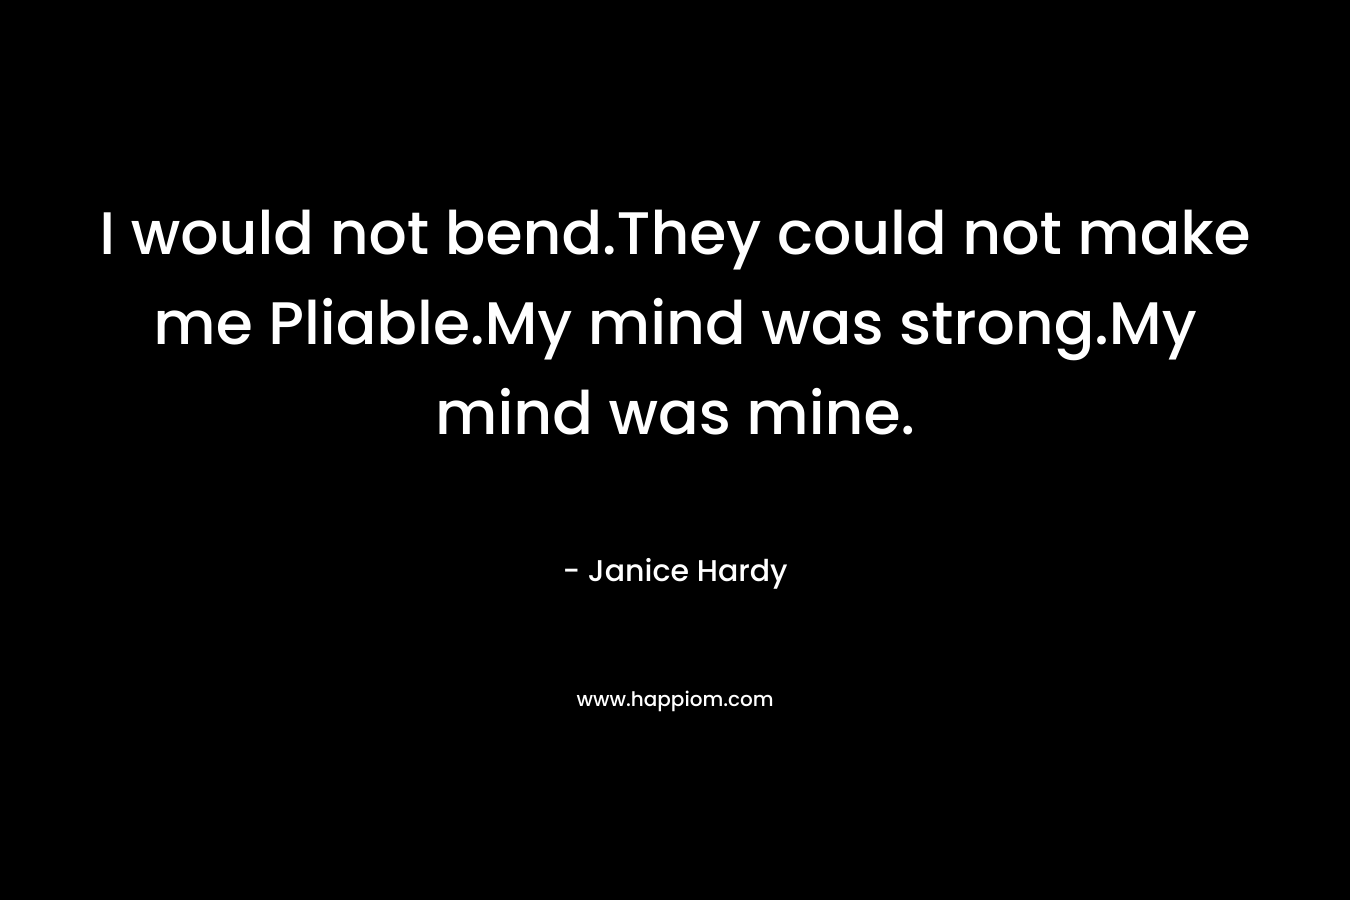 I would not bend.They could not make me Pliable.My mind was strong.My mind was mine.